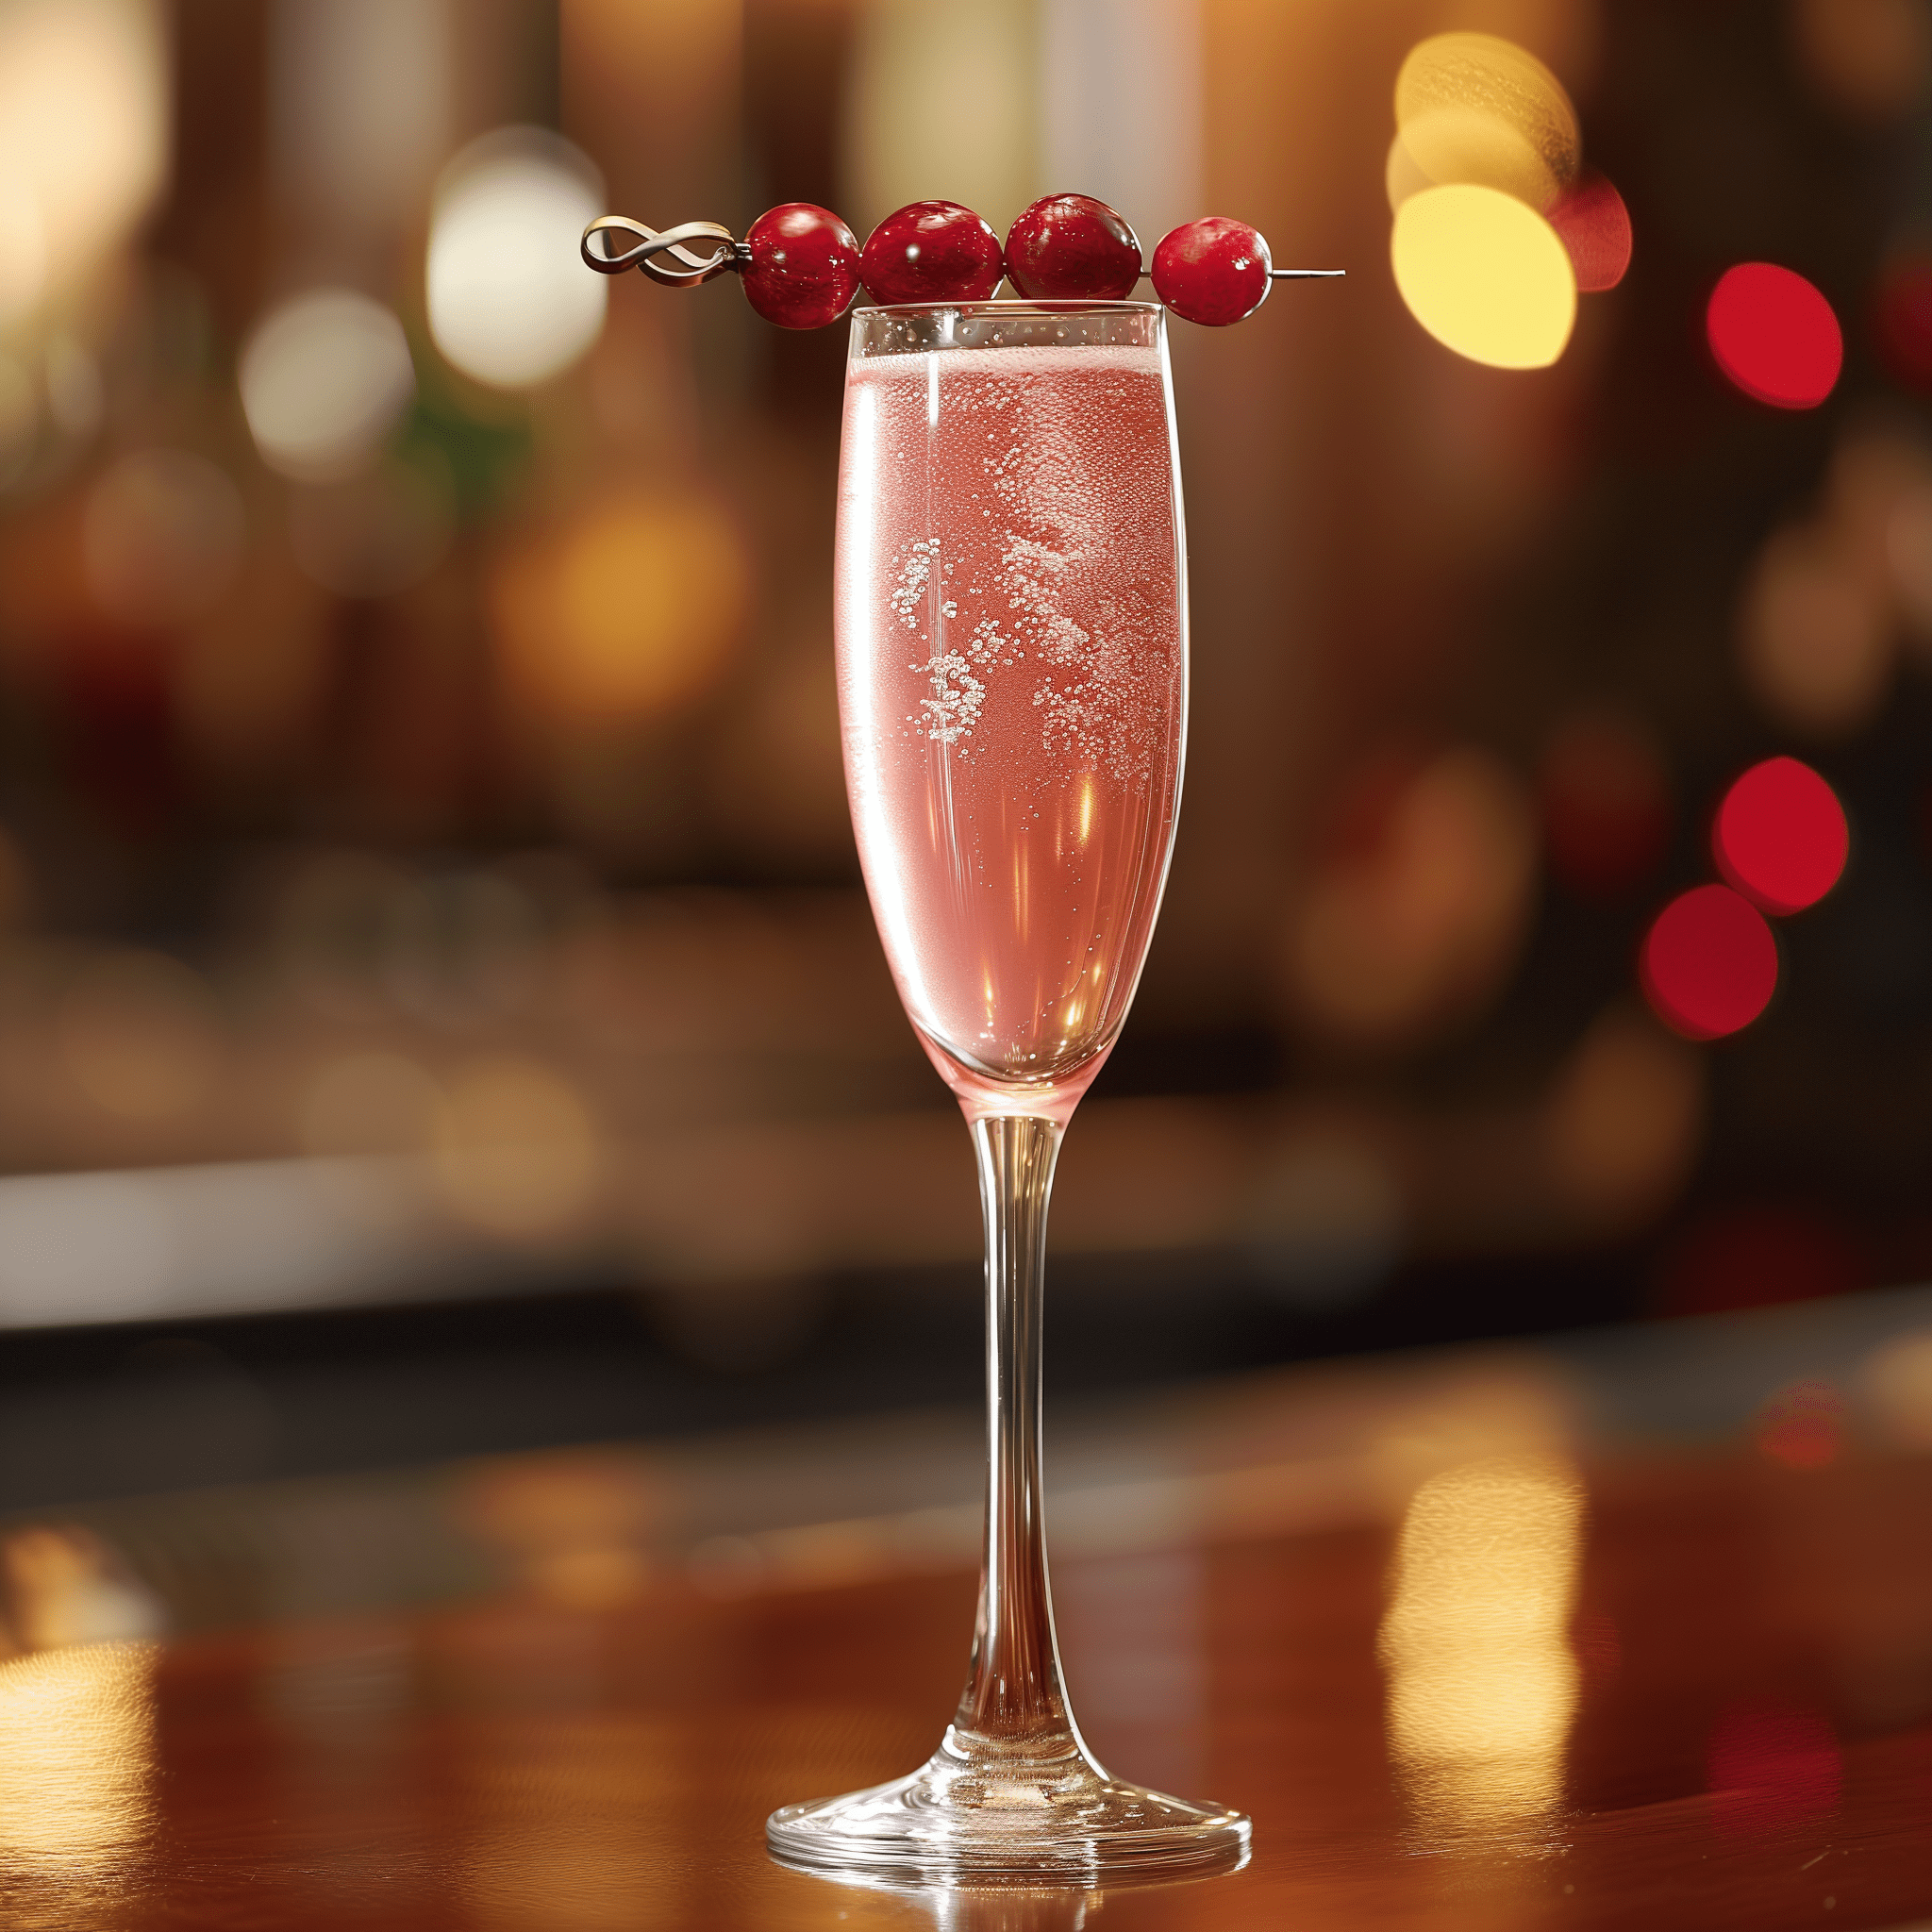 Vanilla Cranberry Mimosa Cocktail Recipe - The Vanilla Cranberry Mimosa offers a delightful interplay of flavors. It's lightly sweet with a tart edge from the cranberry juice, while the vanilla vodka adds a smooth, creamy undertone. The sparkling wine tops it off with a crisp, bubbly finish that refreshes the palate.